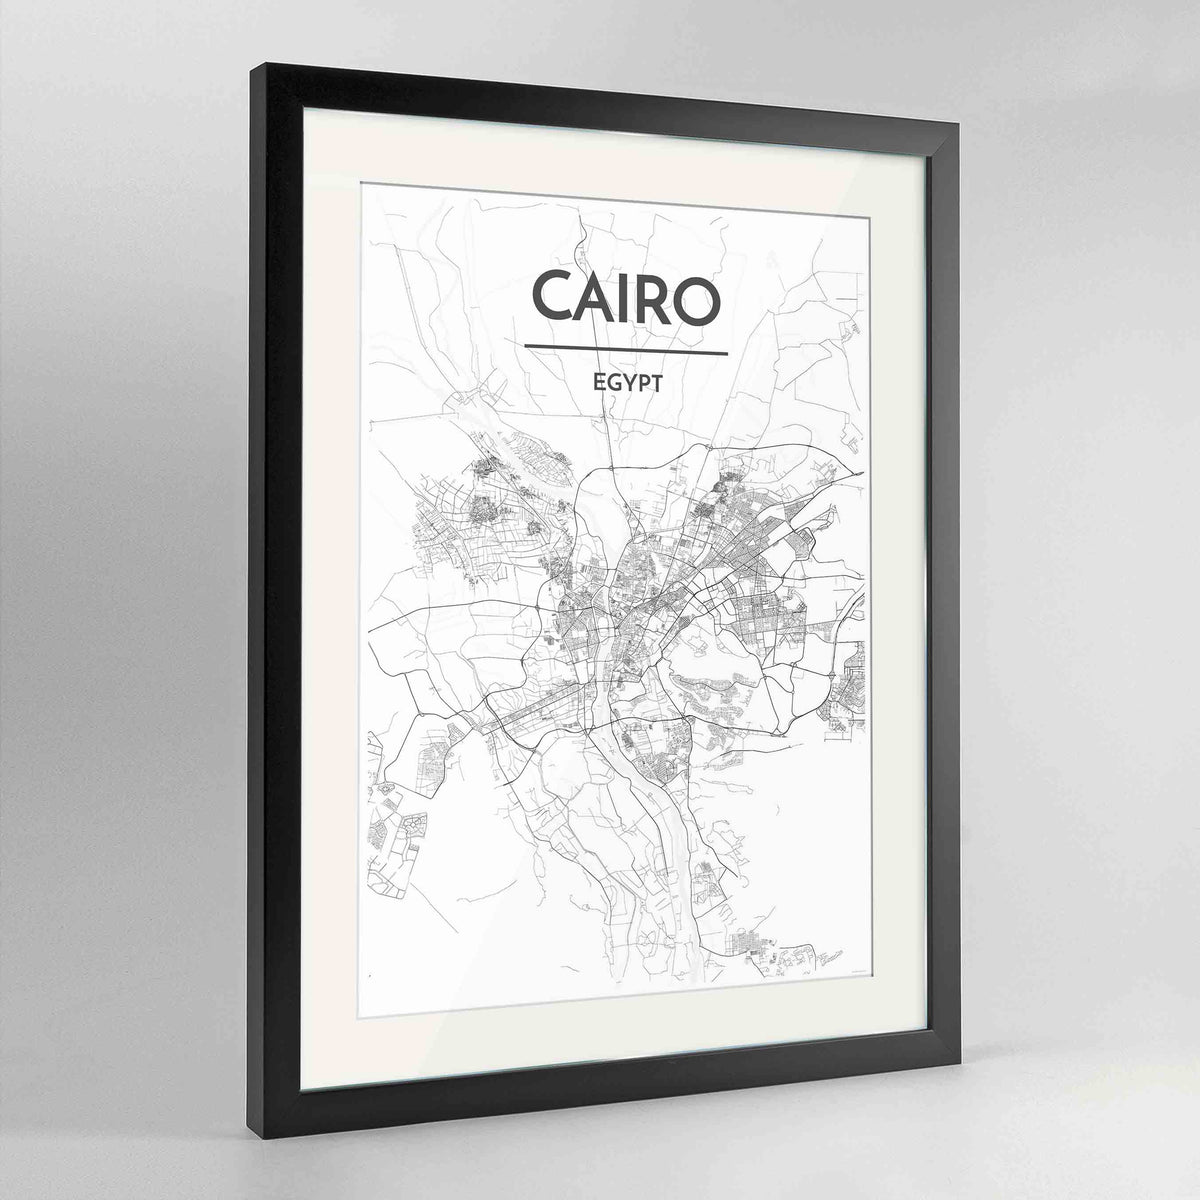 Framed Cairo Map Art Print 24x36&quot; Contemporary Black frame Point Two Design Group